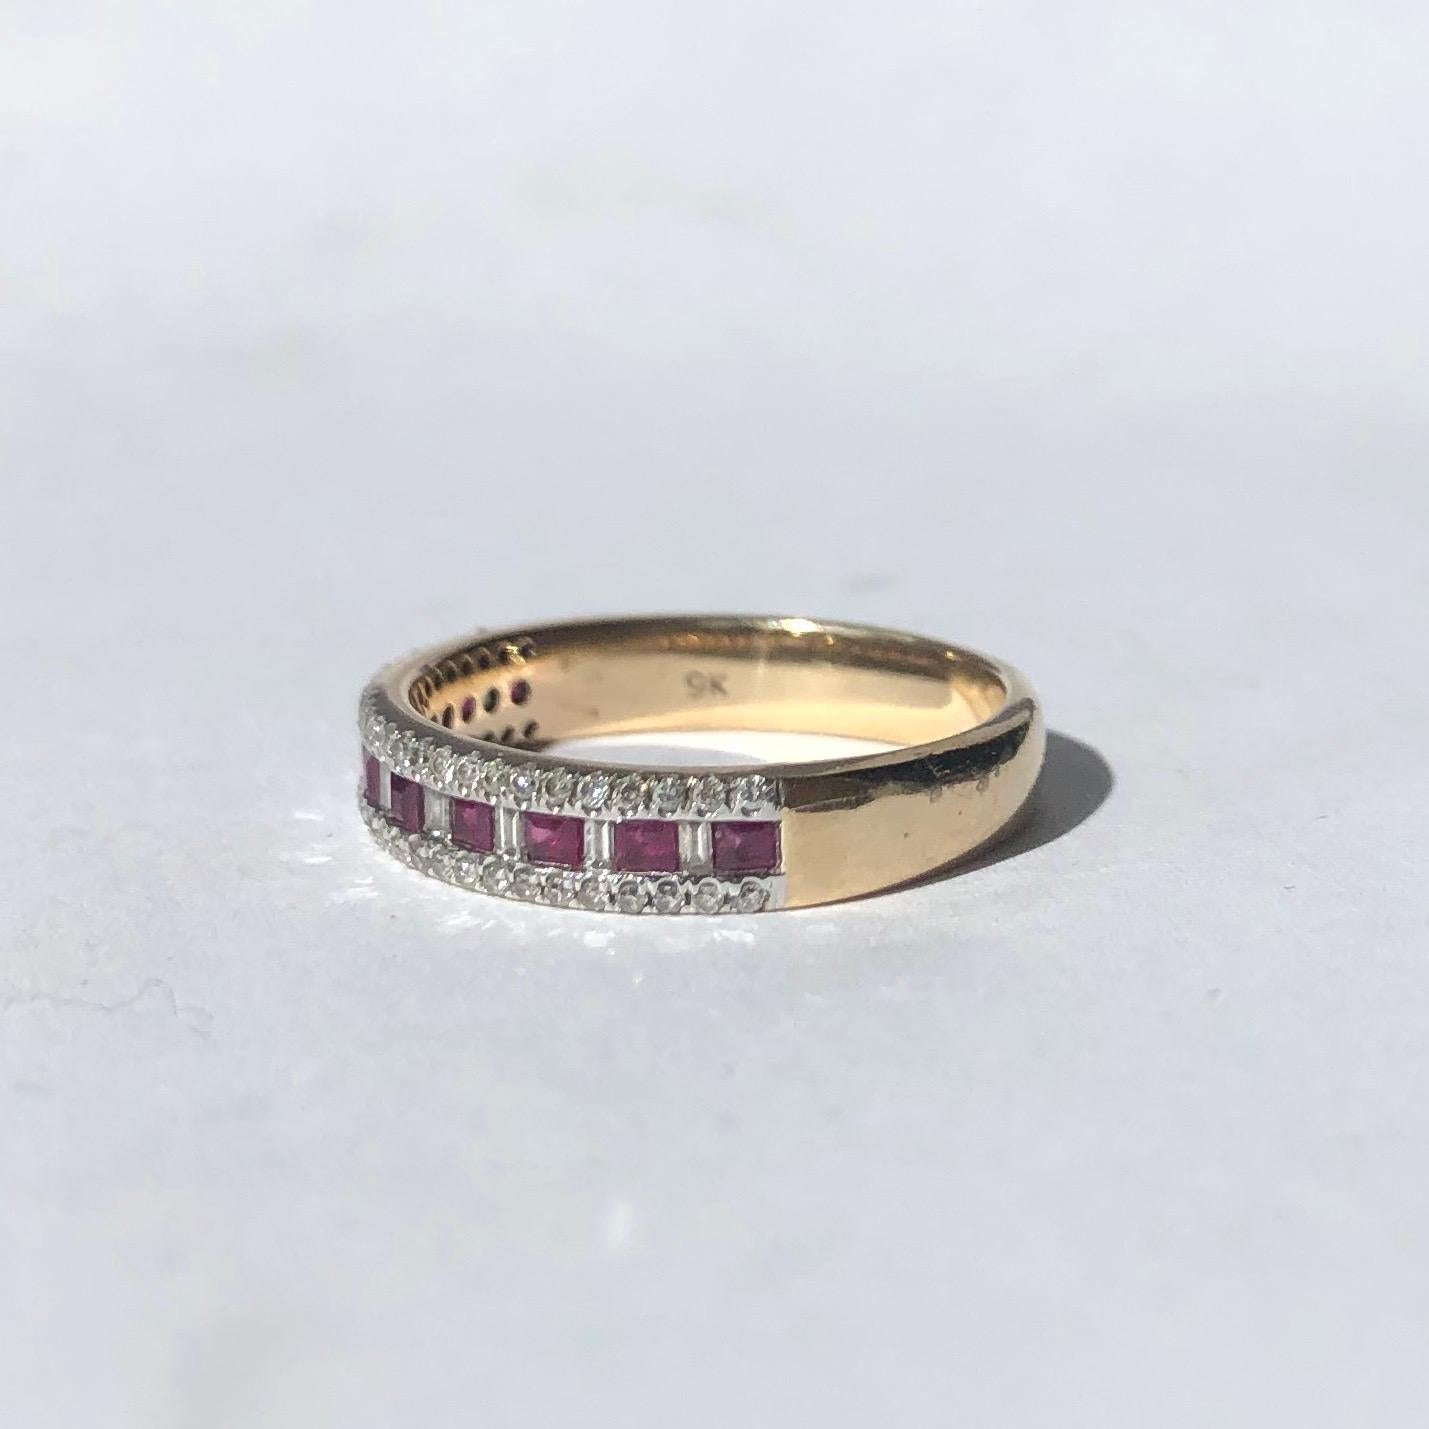 The stones are so gorgeous in this band. The rubies are square cut and total 50pts and in-between these red stones are emerald cut diamonds totalling 10pts. Either side of the strip of lovey stones are round brilliant cut diamond points all set in